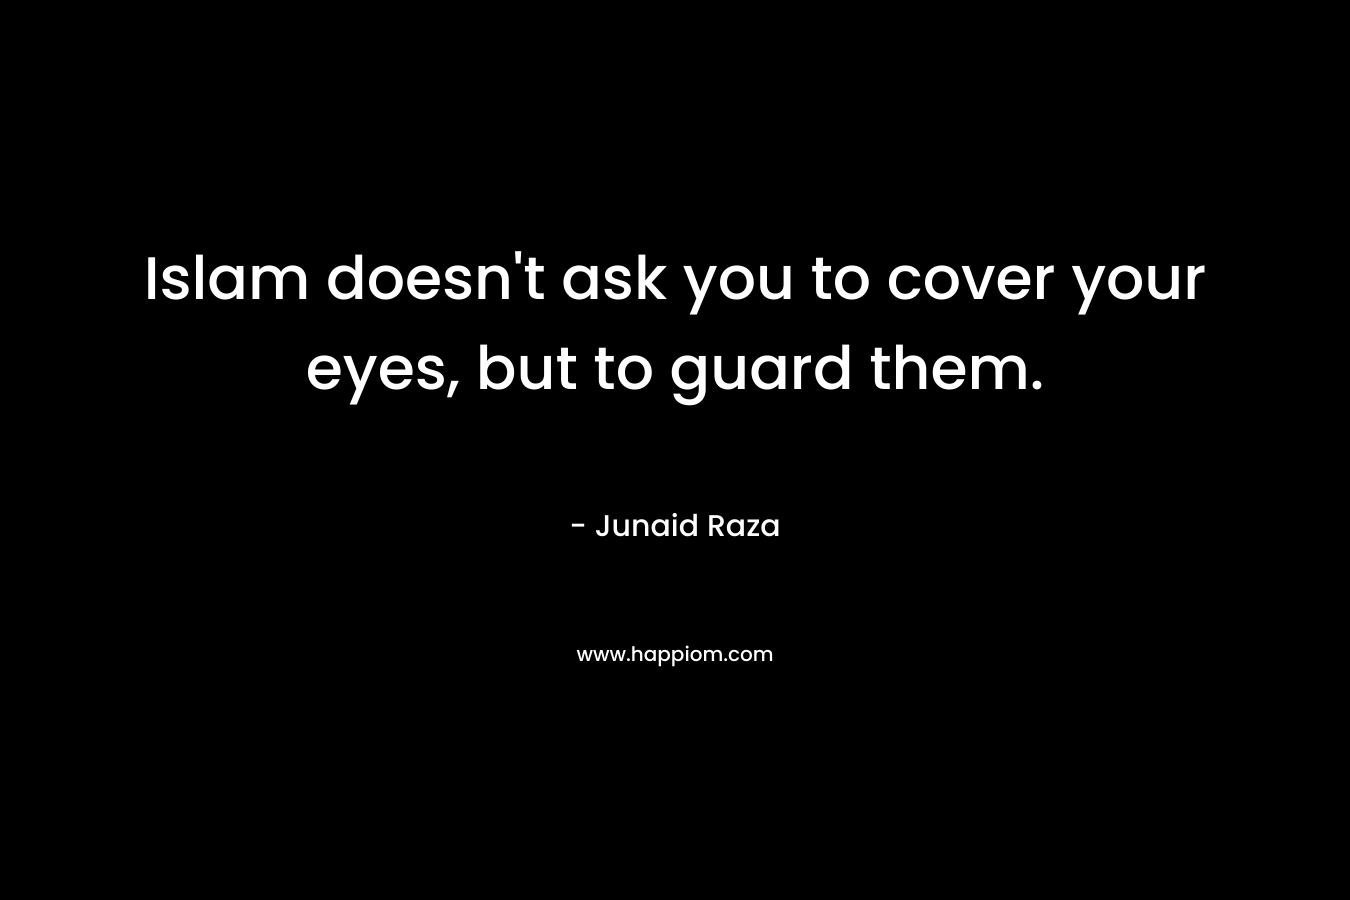 Islam doesn’t ask you to cover your eyes, but to guard them. – Junaid Raza